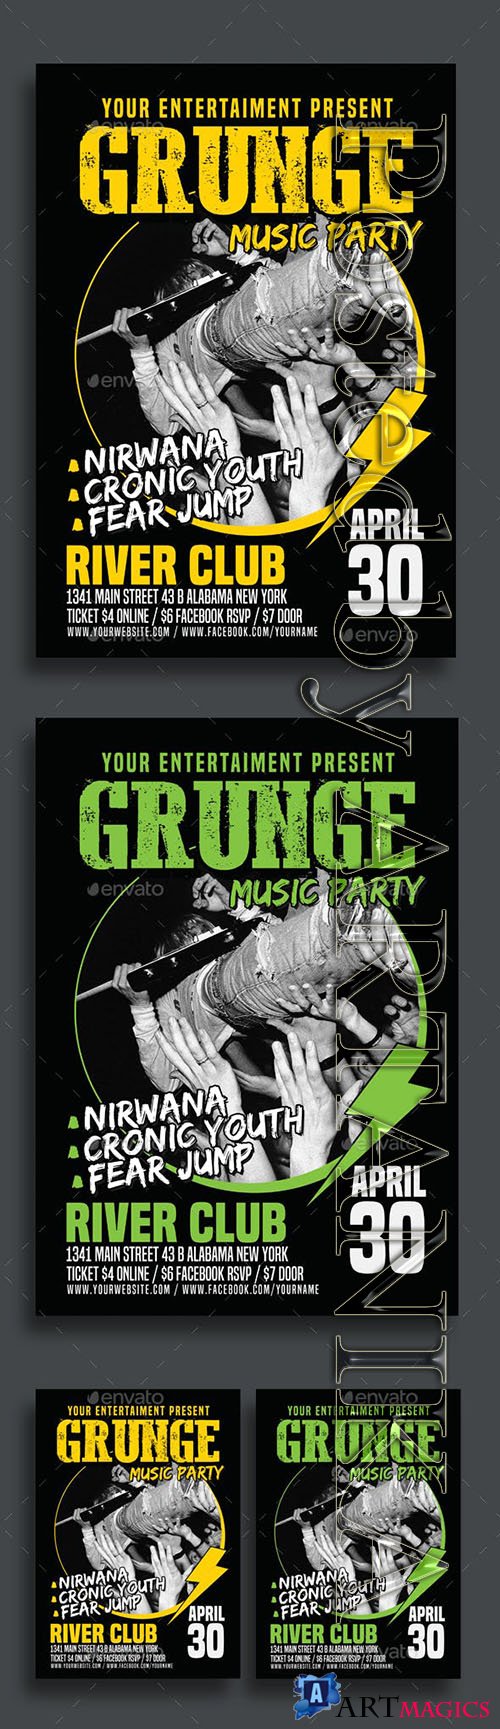 Graphicriver - Grunge Music Party Poster Flyer 15796615